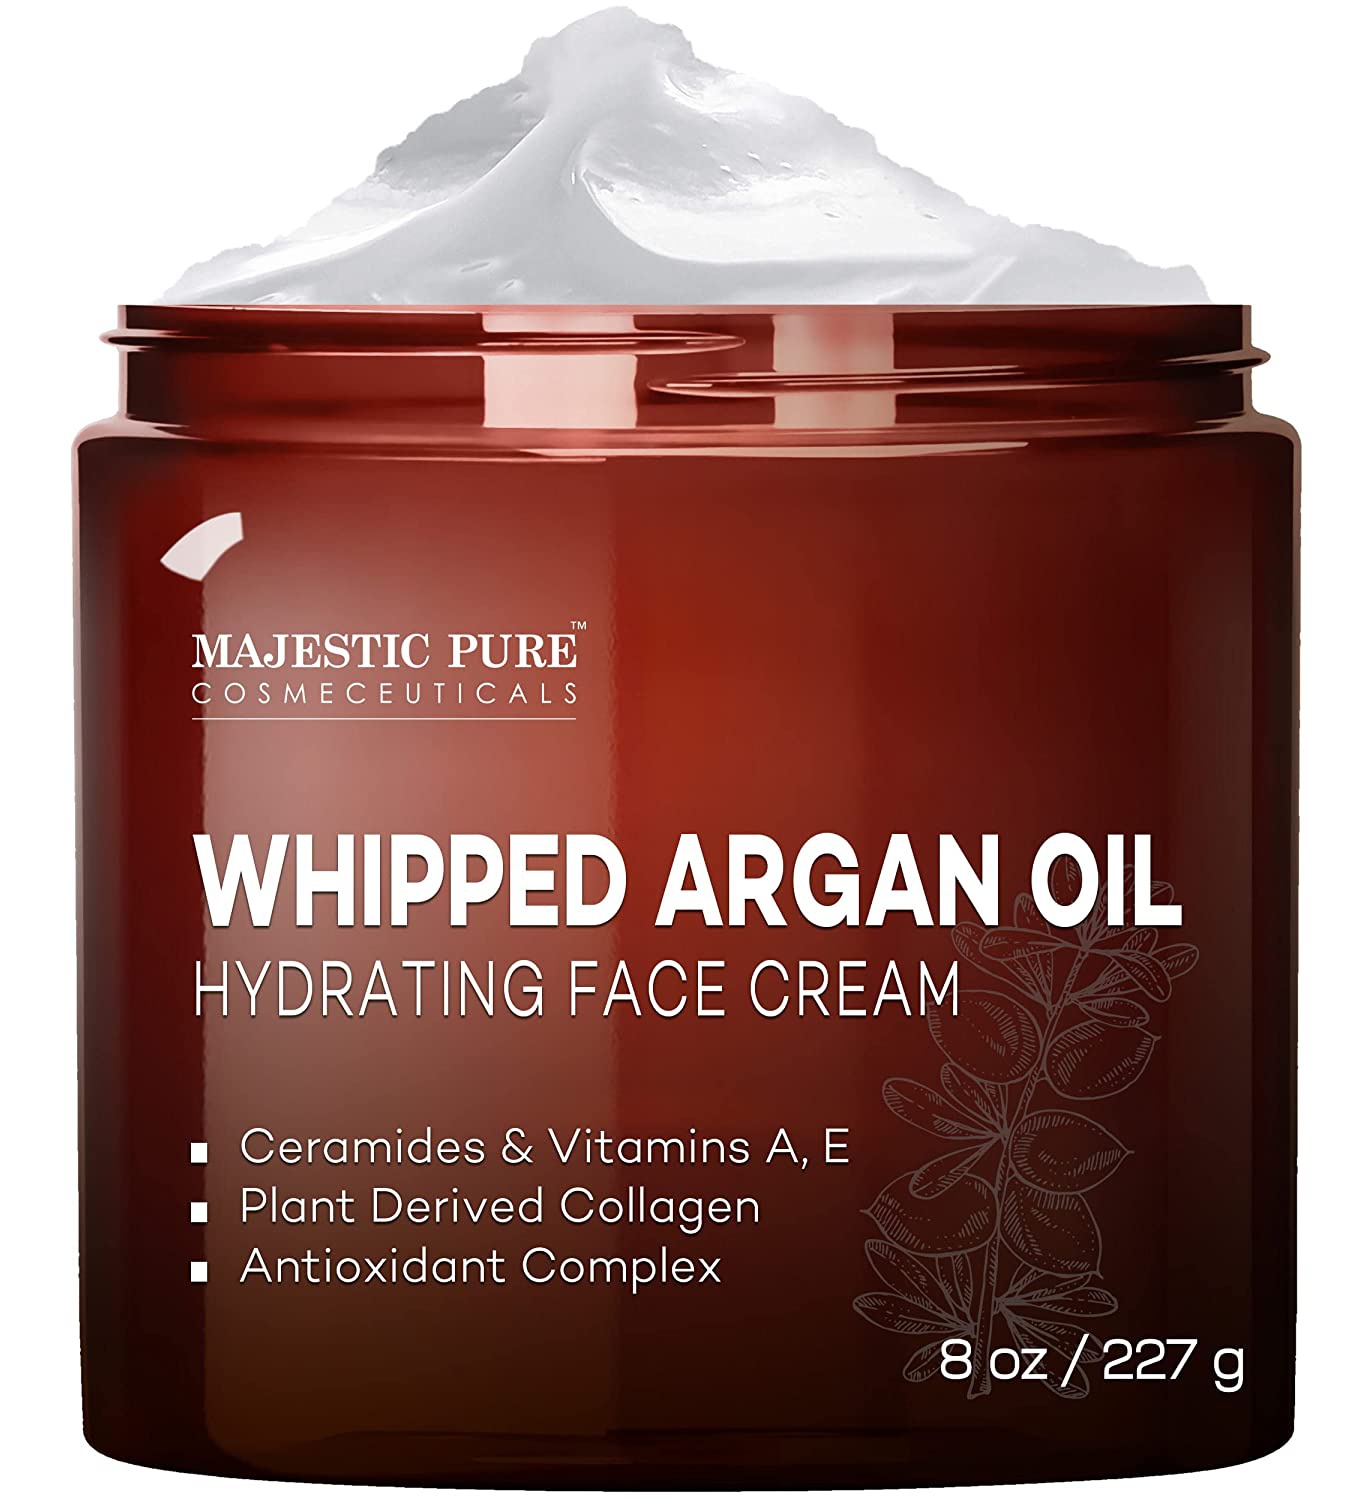 Majestic Pure Whipped Argan Oil